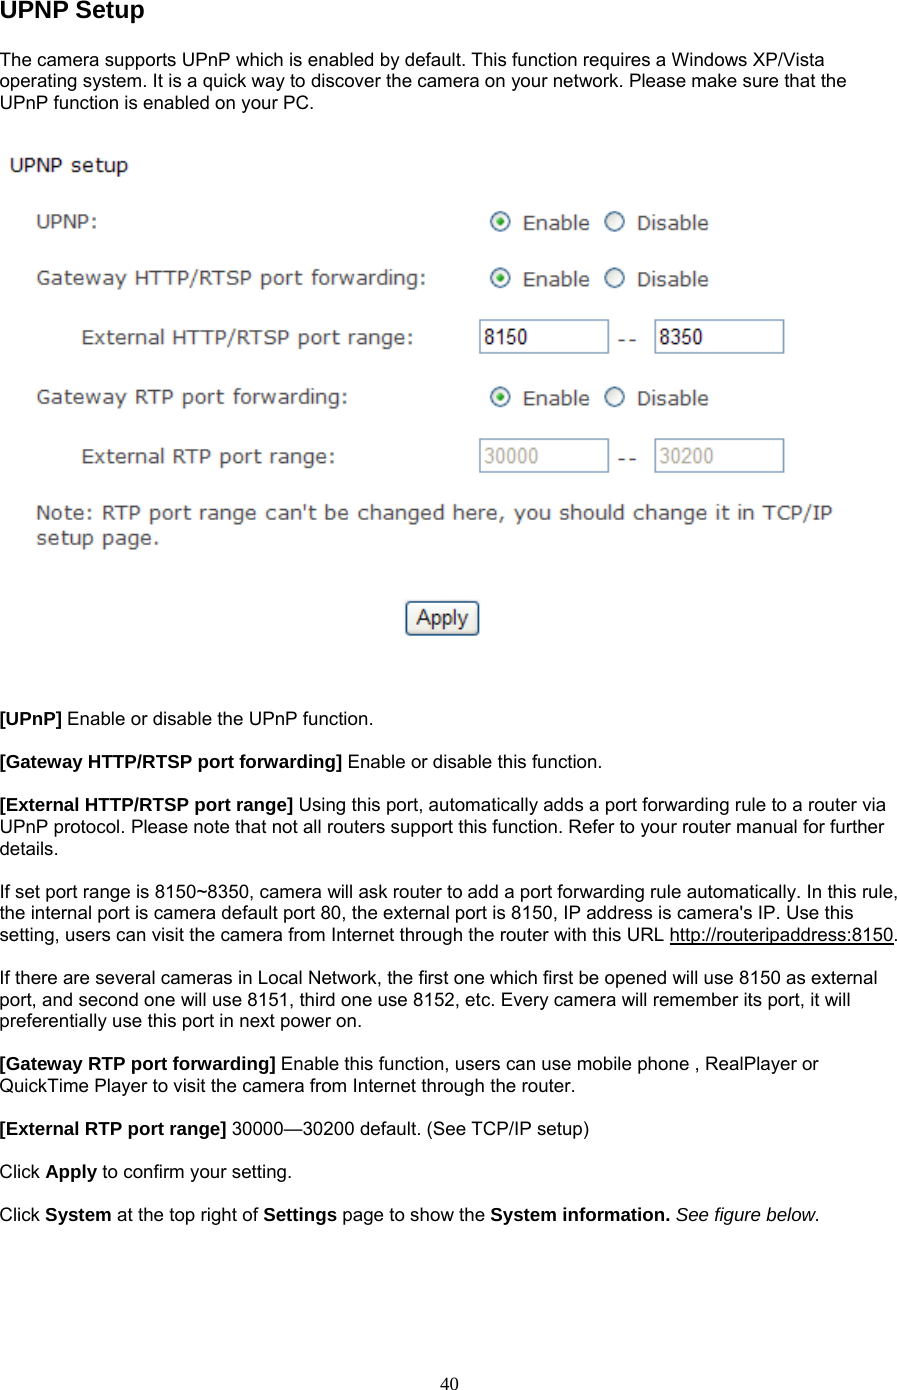 UPNP Setup   The camera supports UPnP which is enabled by default. This function requires a Windows XP/Vista operating system. It is a quick way to discover the camera on your network. Please make sure that the UPnP function is enabled on your PC.   [UPnP] Enable or disable the UPnP function.    [Gateway HTTP/RTSP port forwarding] Enable or disable this function.  [External HTTP/RTSP port range] Using this port, automatically adds a port forwarding rule to a router via UPnP protocol. Please note that not all routers support this function. Refer to your router manual for further details.   If set port range is 8150~8350, camera will ask router to add a port forwarding rule automatically. In this rule, the internal port is camera default port 80, the external port is 8150, IP address is camera&apos;s IP. Use this setting, users can visit the camera from Internet through the router with this URL http://routeripaddress:8150.   If there are several cameras in Local Network, the first one which first be opened will use 8150 as external port, and second one will use 8151, third one use 8152, etc. Every camera will remember its port, it will preferentially use this port in next power on.    [Gateway RTP port forwarding] Enable this function, users can use mobile phone , RealPlayer or QuickTime Player to visit the camera from Internet through the router.  [External RTP port range] 30000—30200 default. (See TCP/IP setup)  Click Apply to confirm your setting.  Click System at the top right of Settings page to show the System information. See figure below.   40